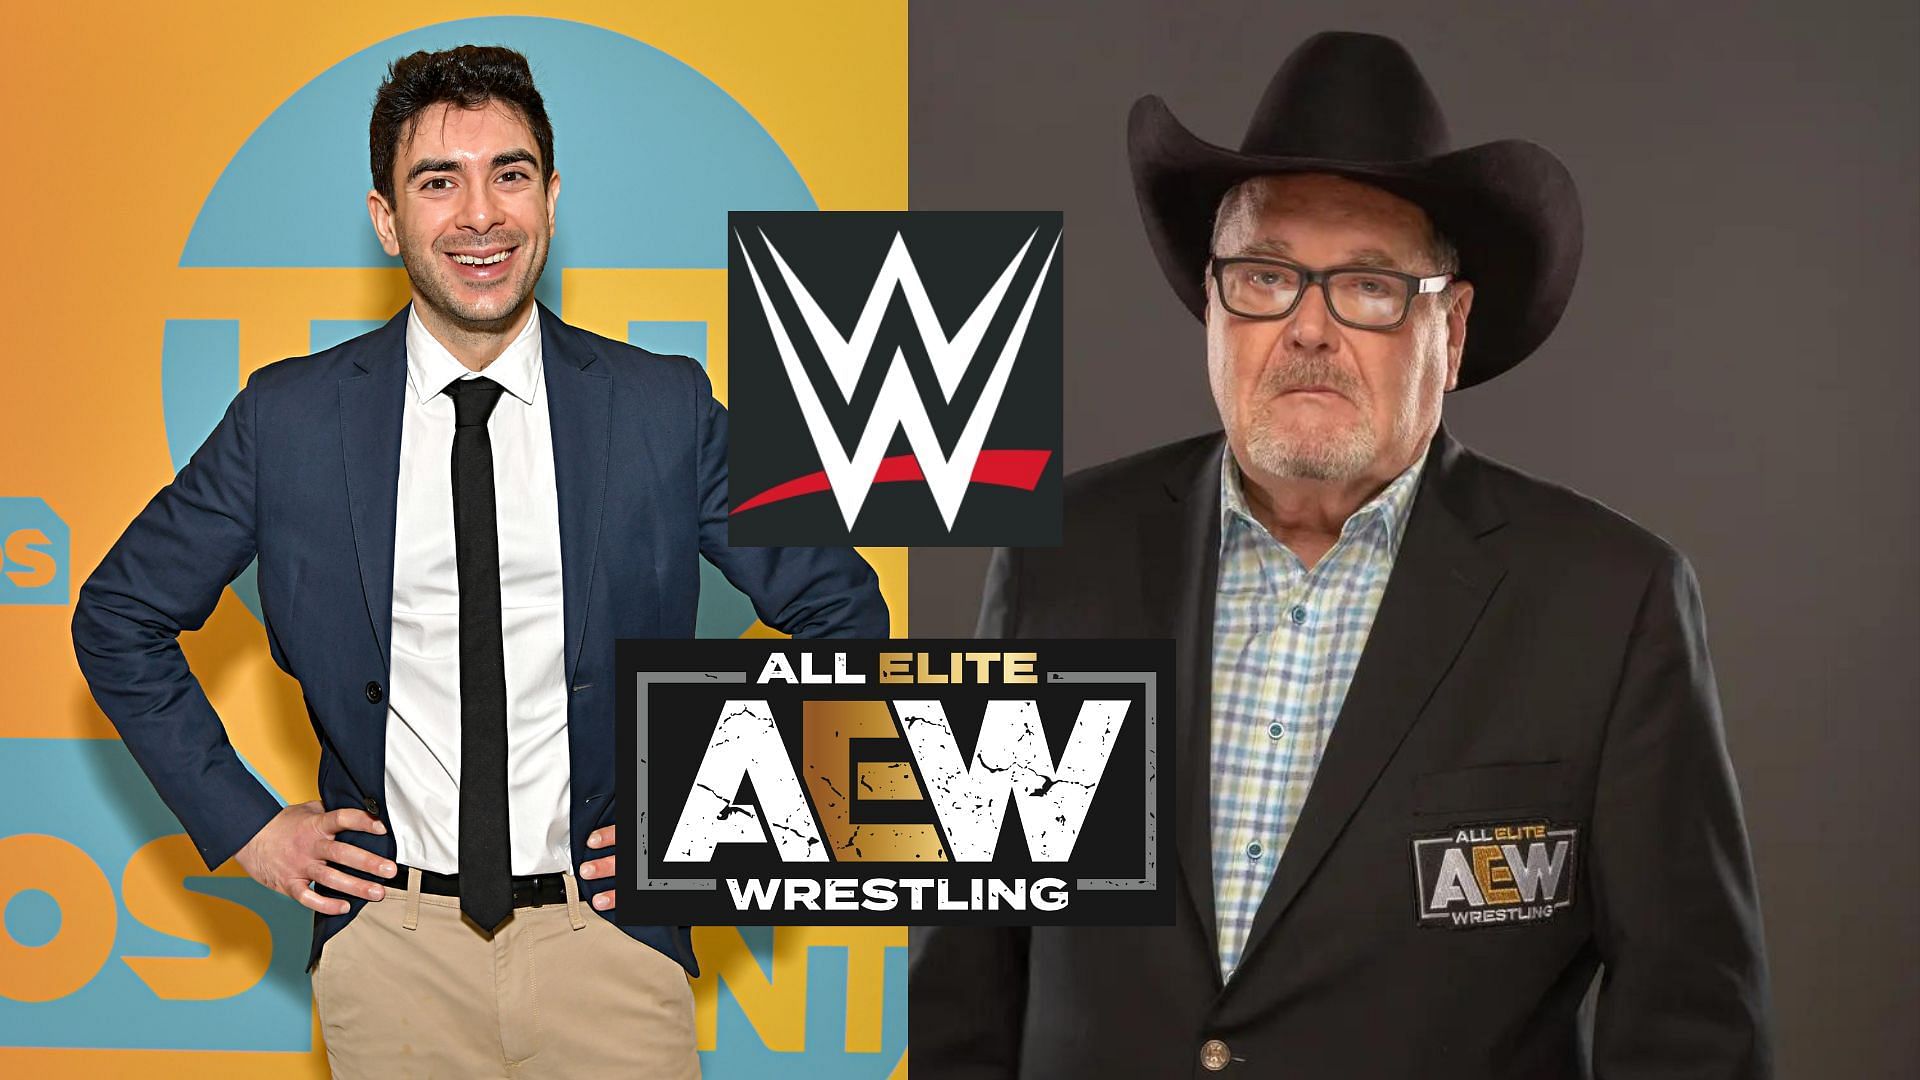 Tony Khan and Jim Ross are members of the AEW team